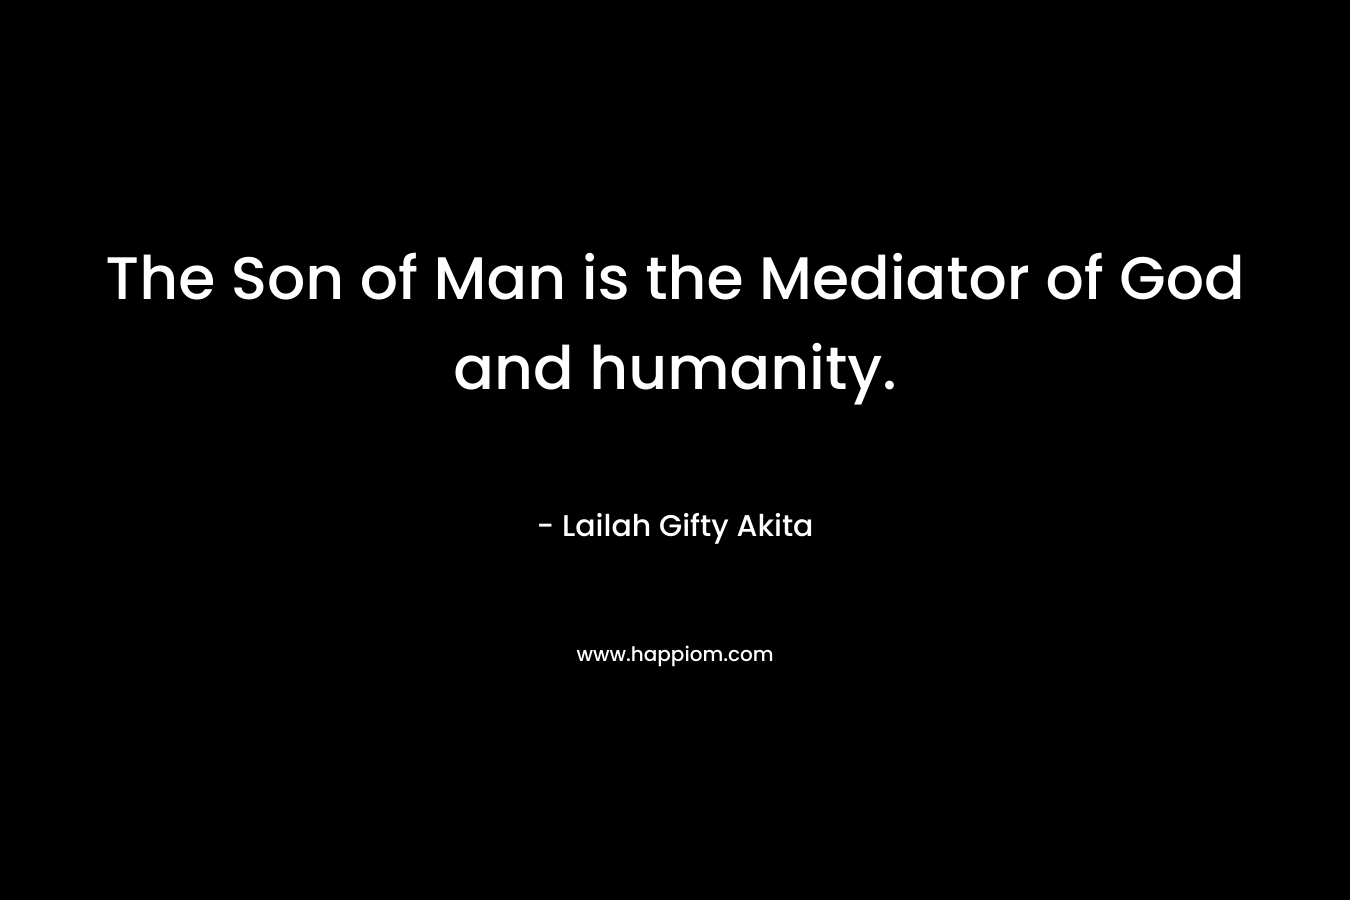 The Son of Man is the Mediator of God and humanity.